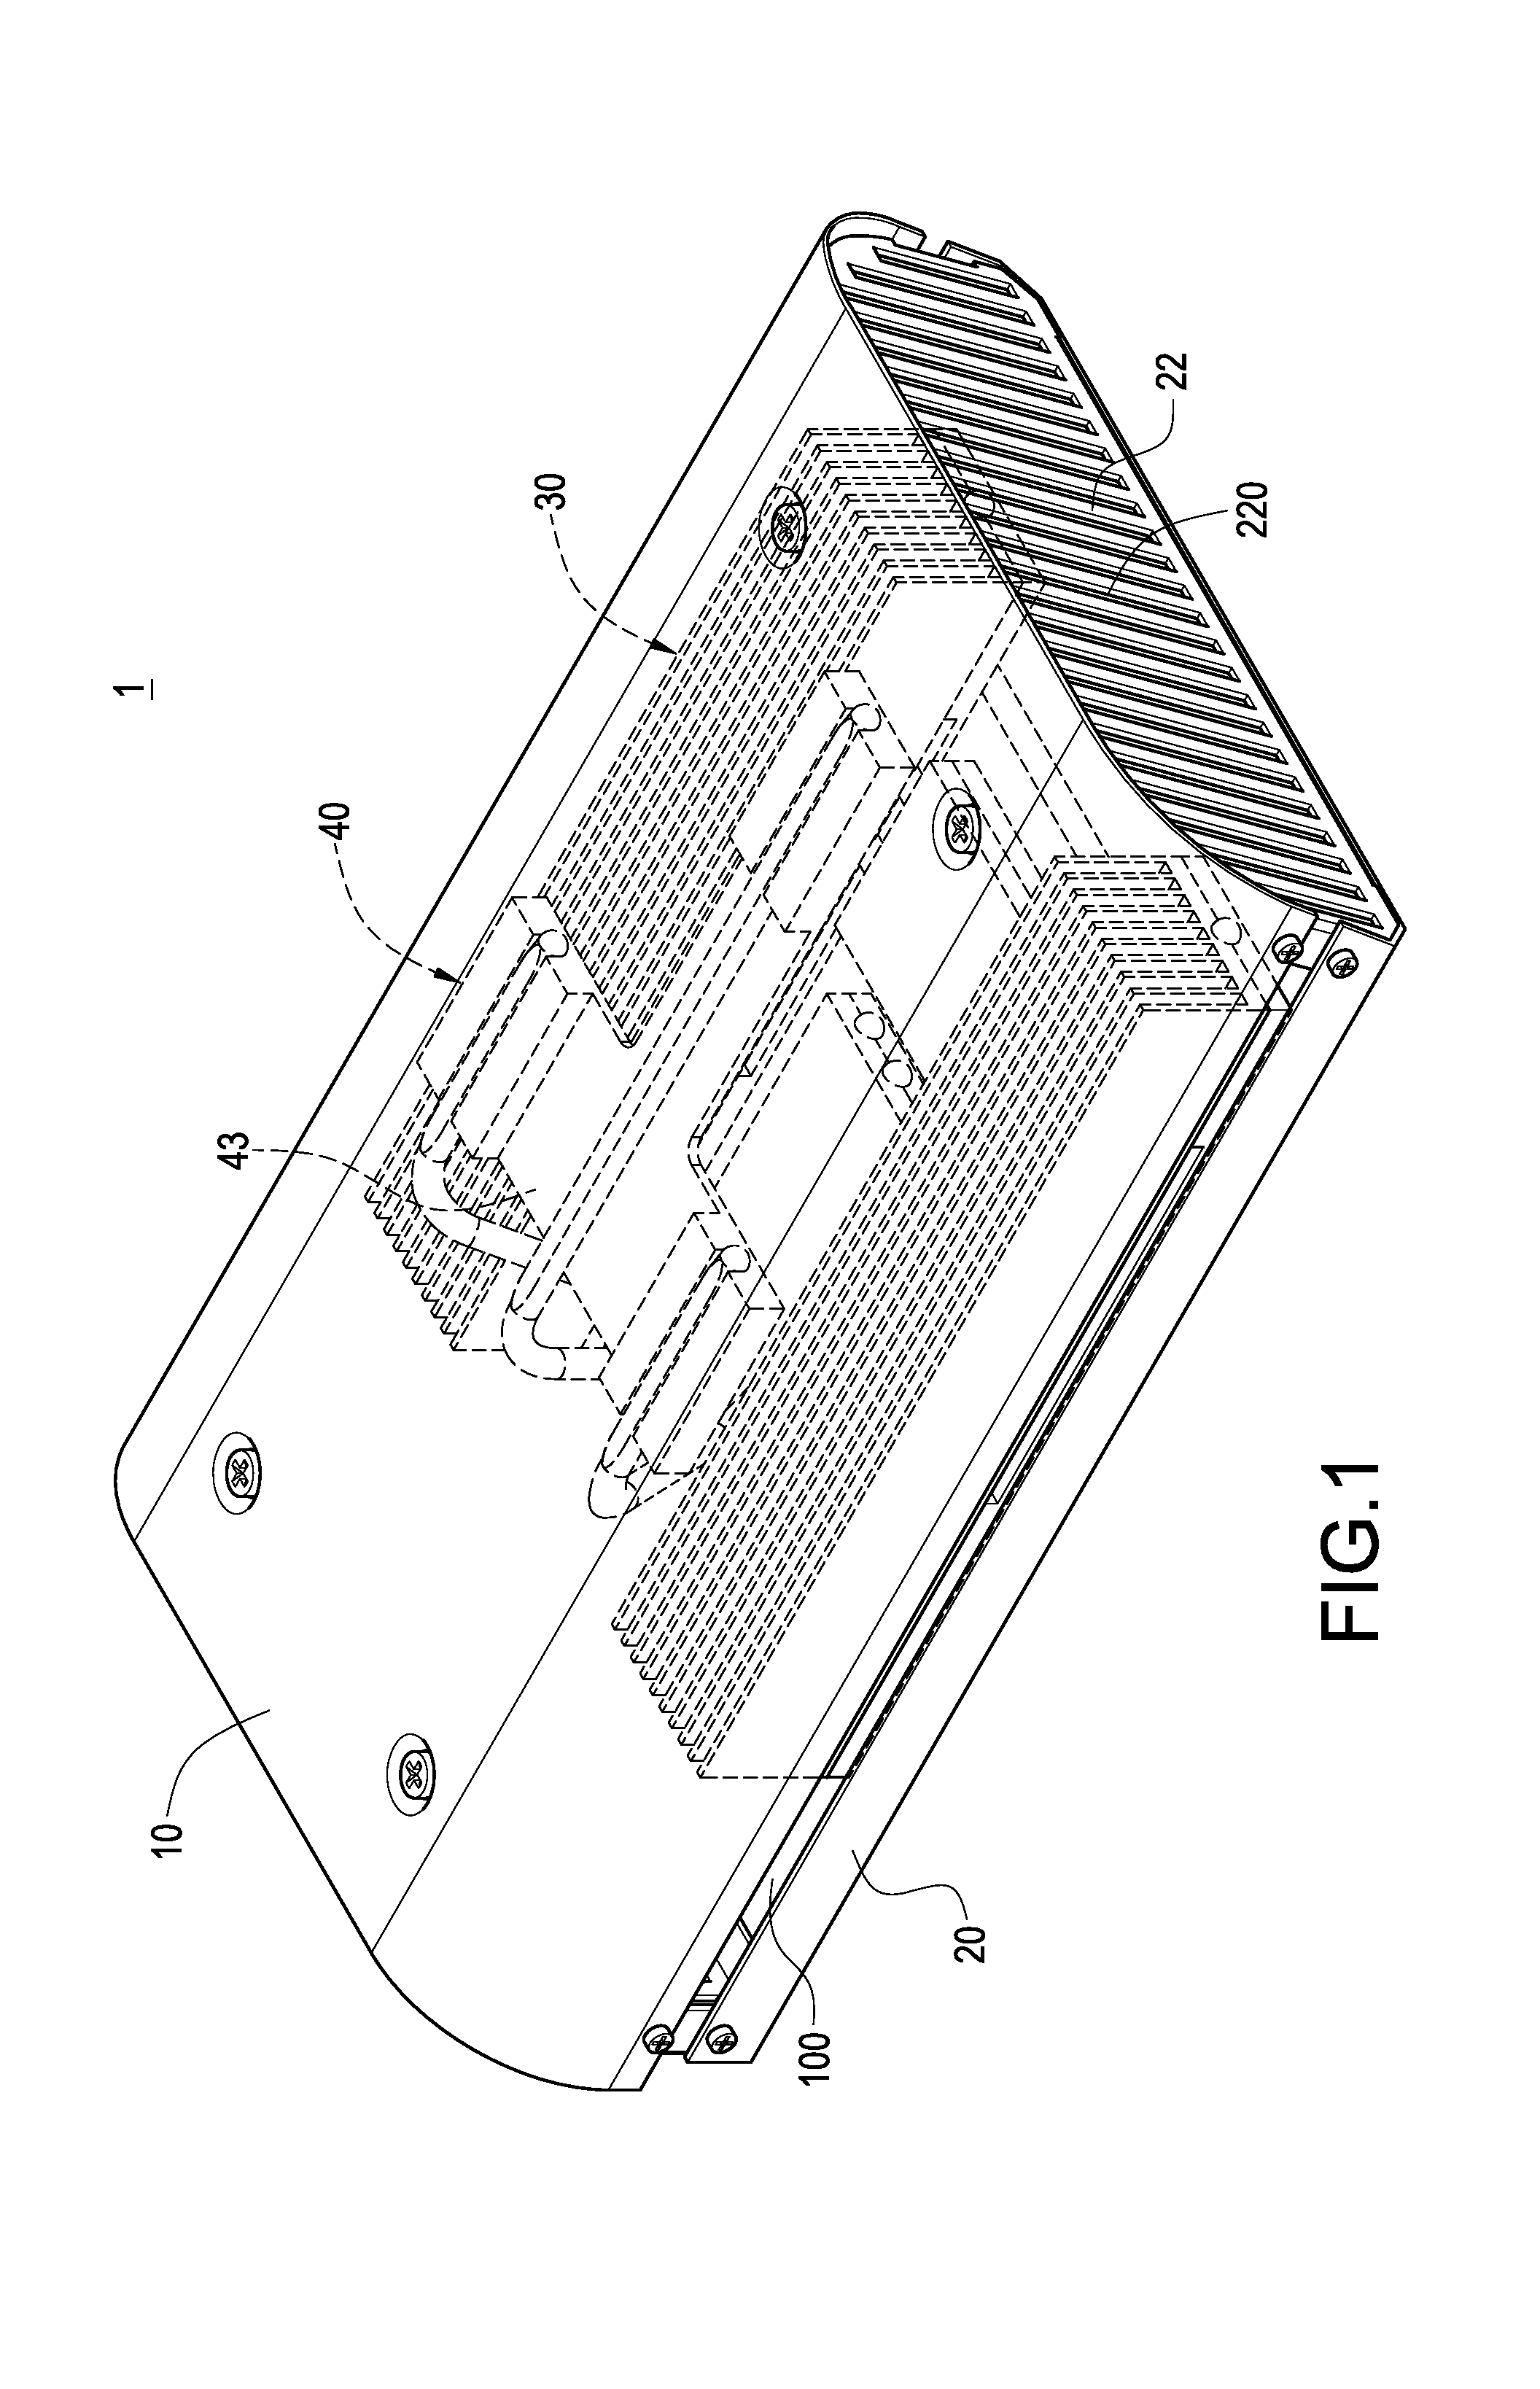 LED lighting device capable of uniformly dissipating heat